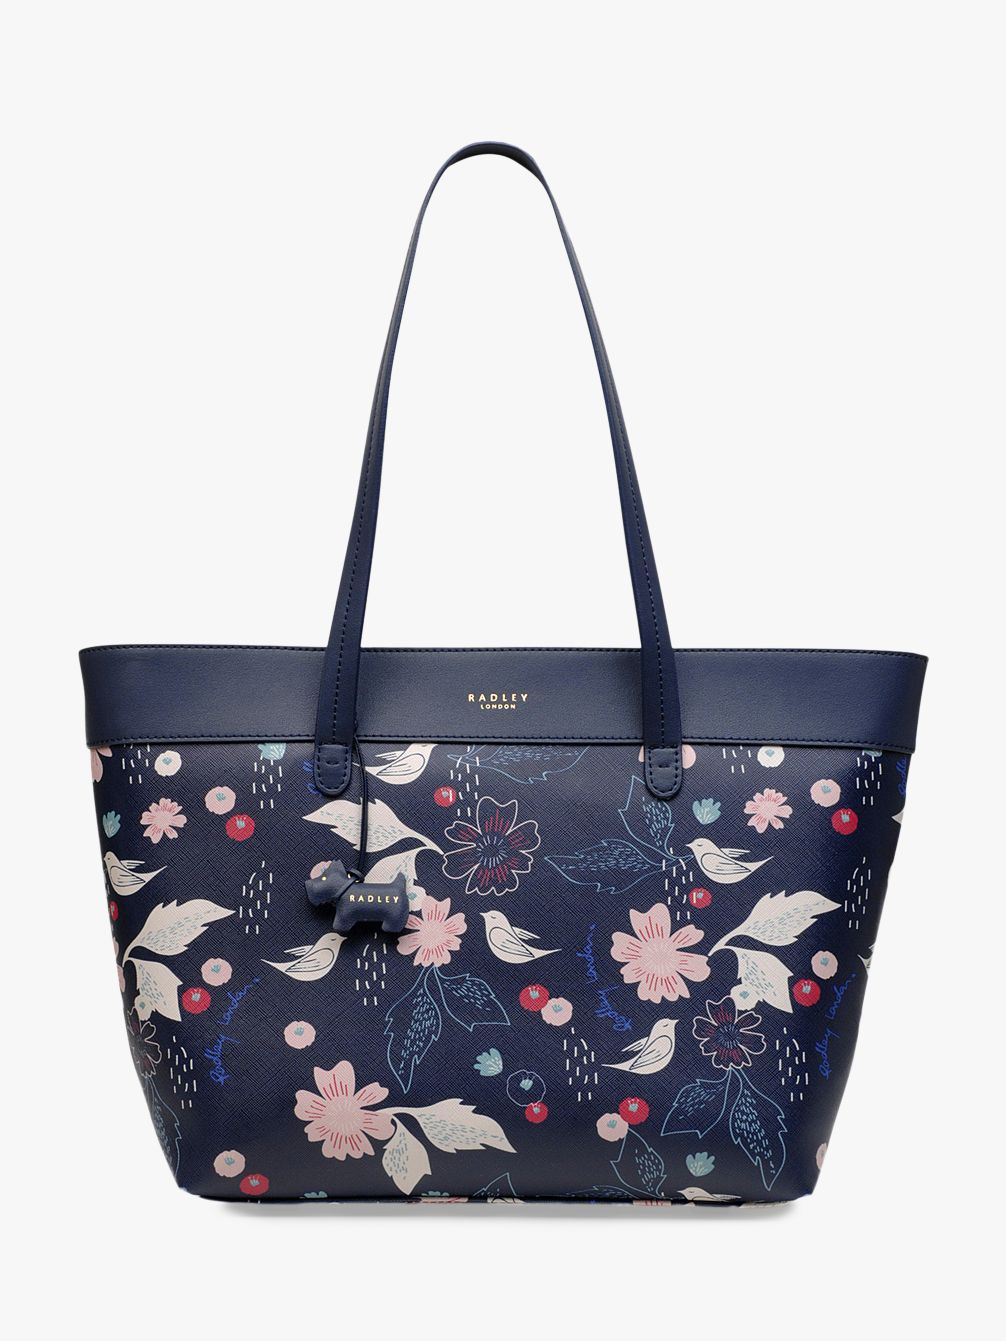 Radley Painterly Floral Canvas tote shopper bag in Cream and Ink Navy Blue